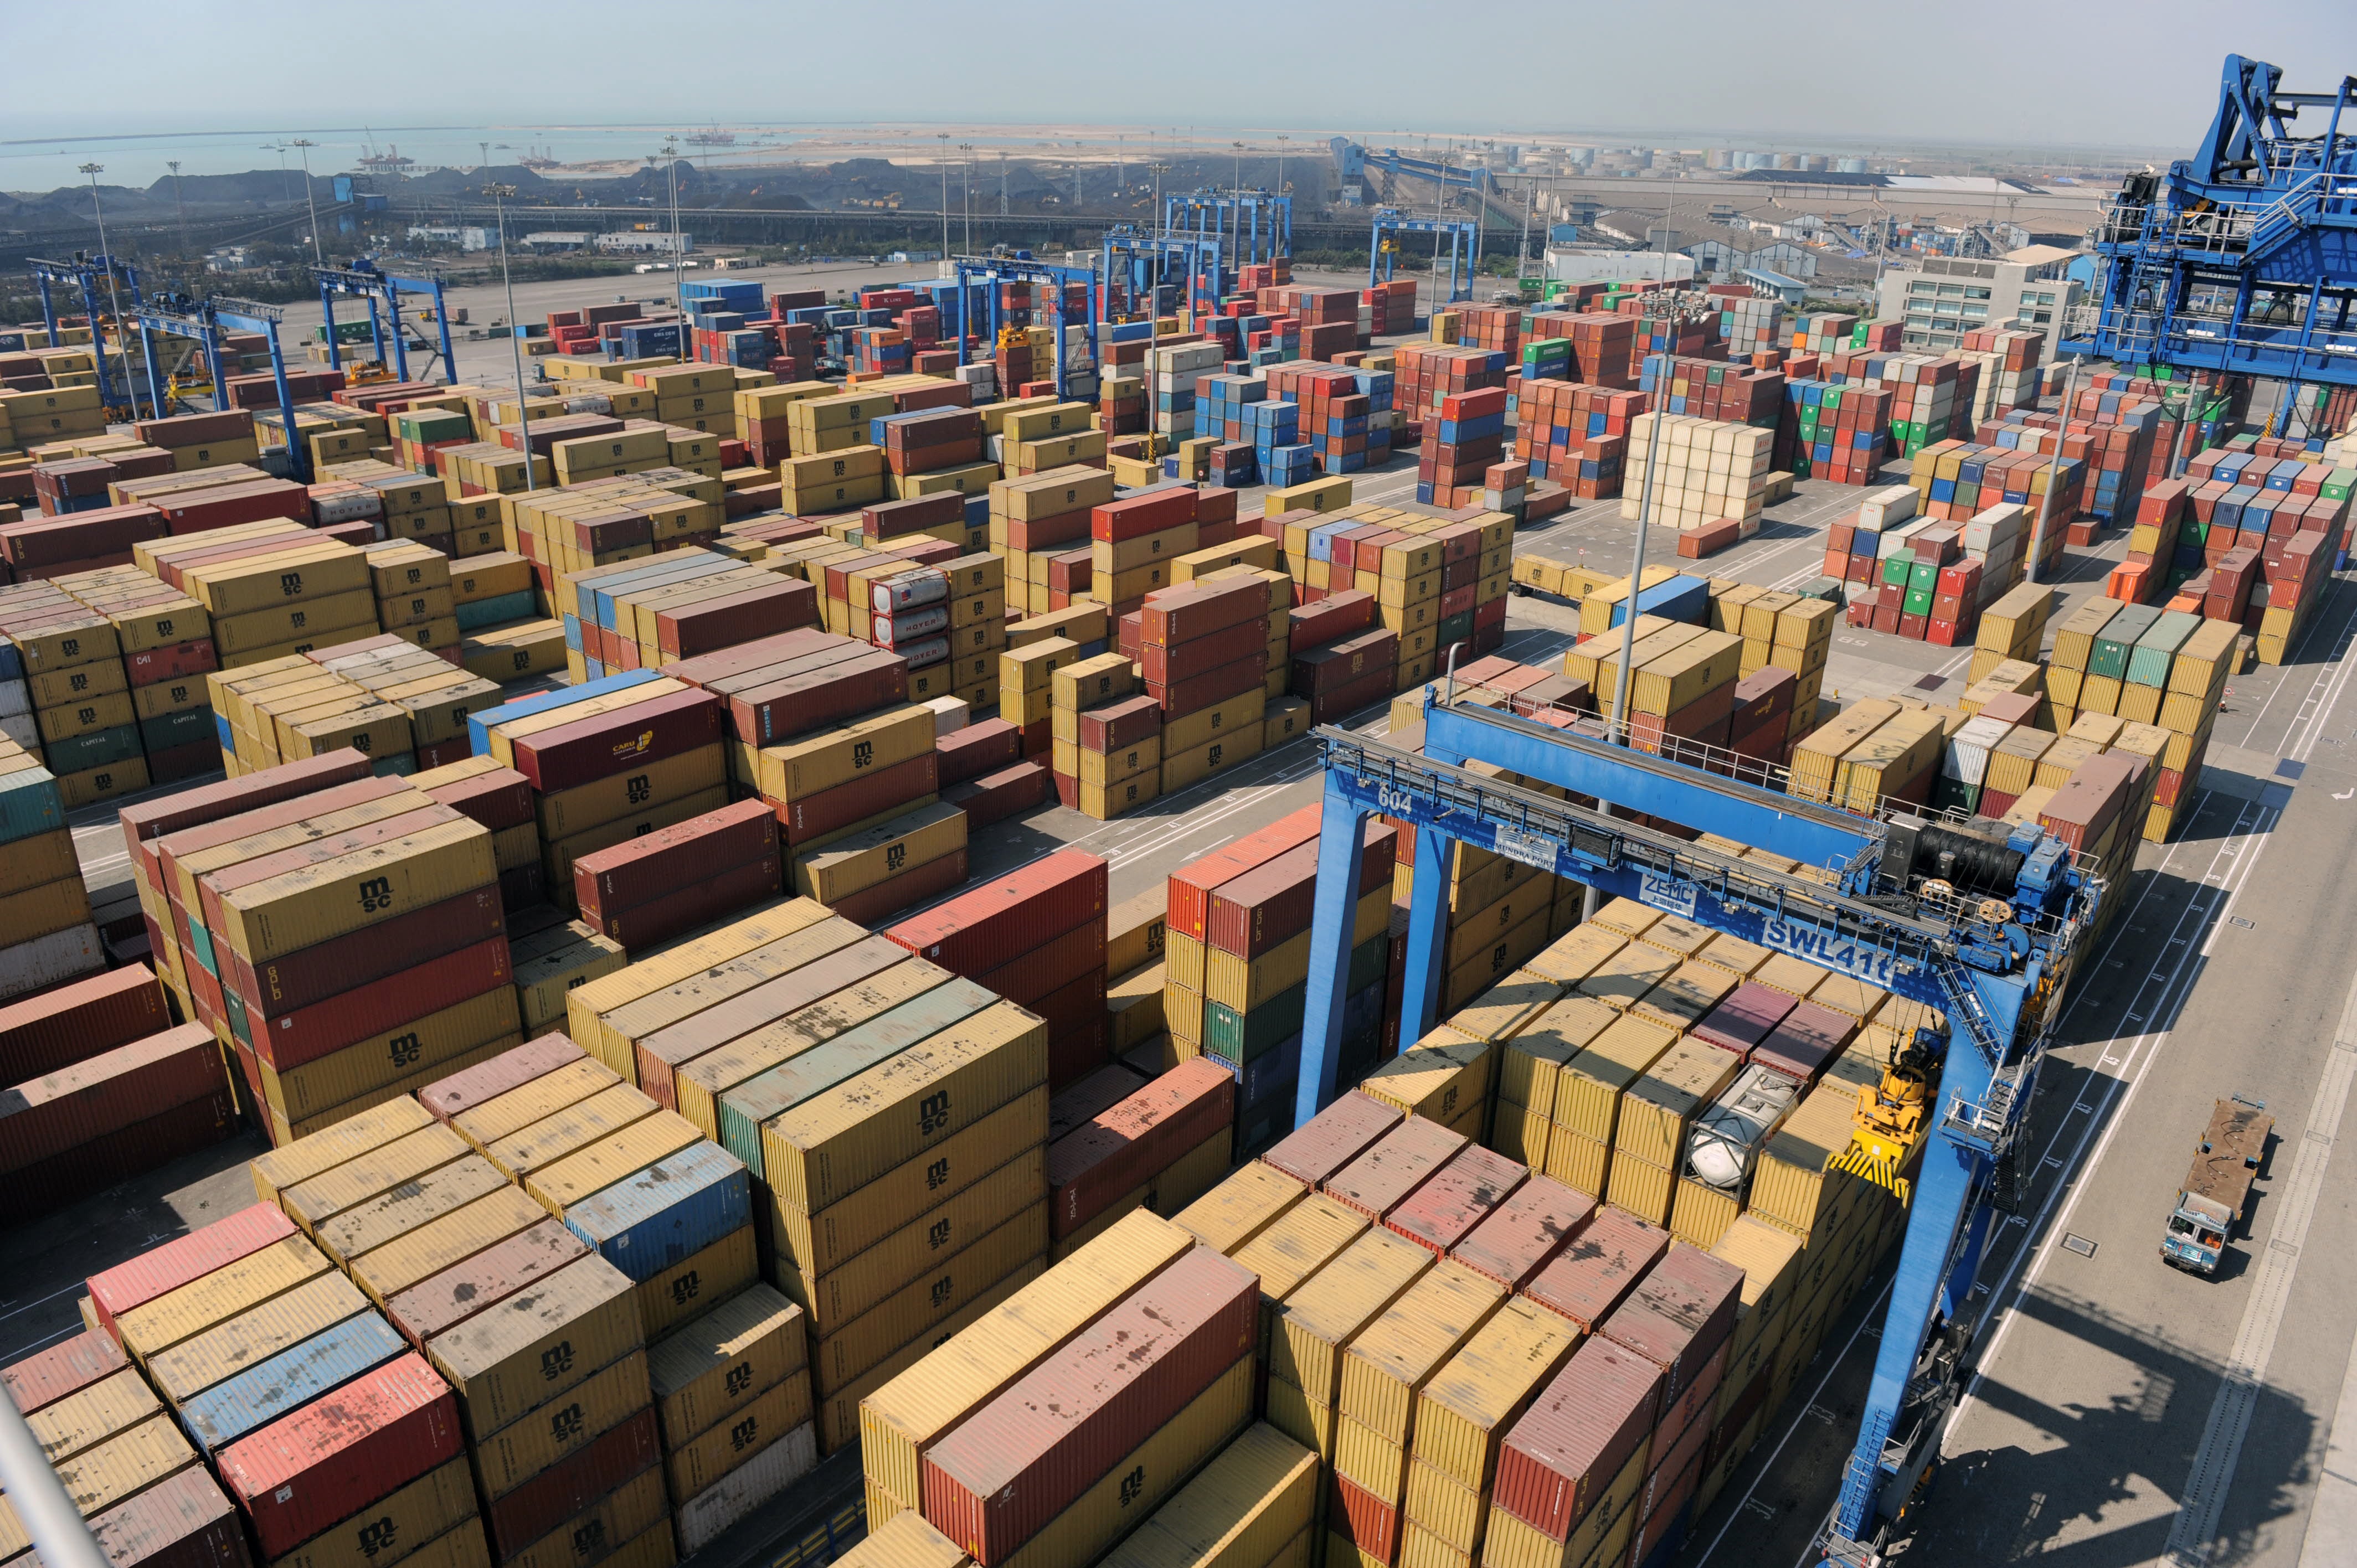 File image: Stacked containers are seen at Mundra Port in Gujarat, India